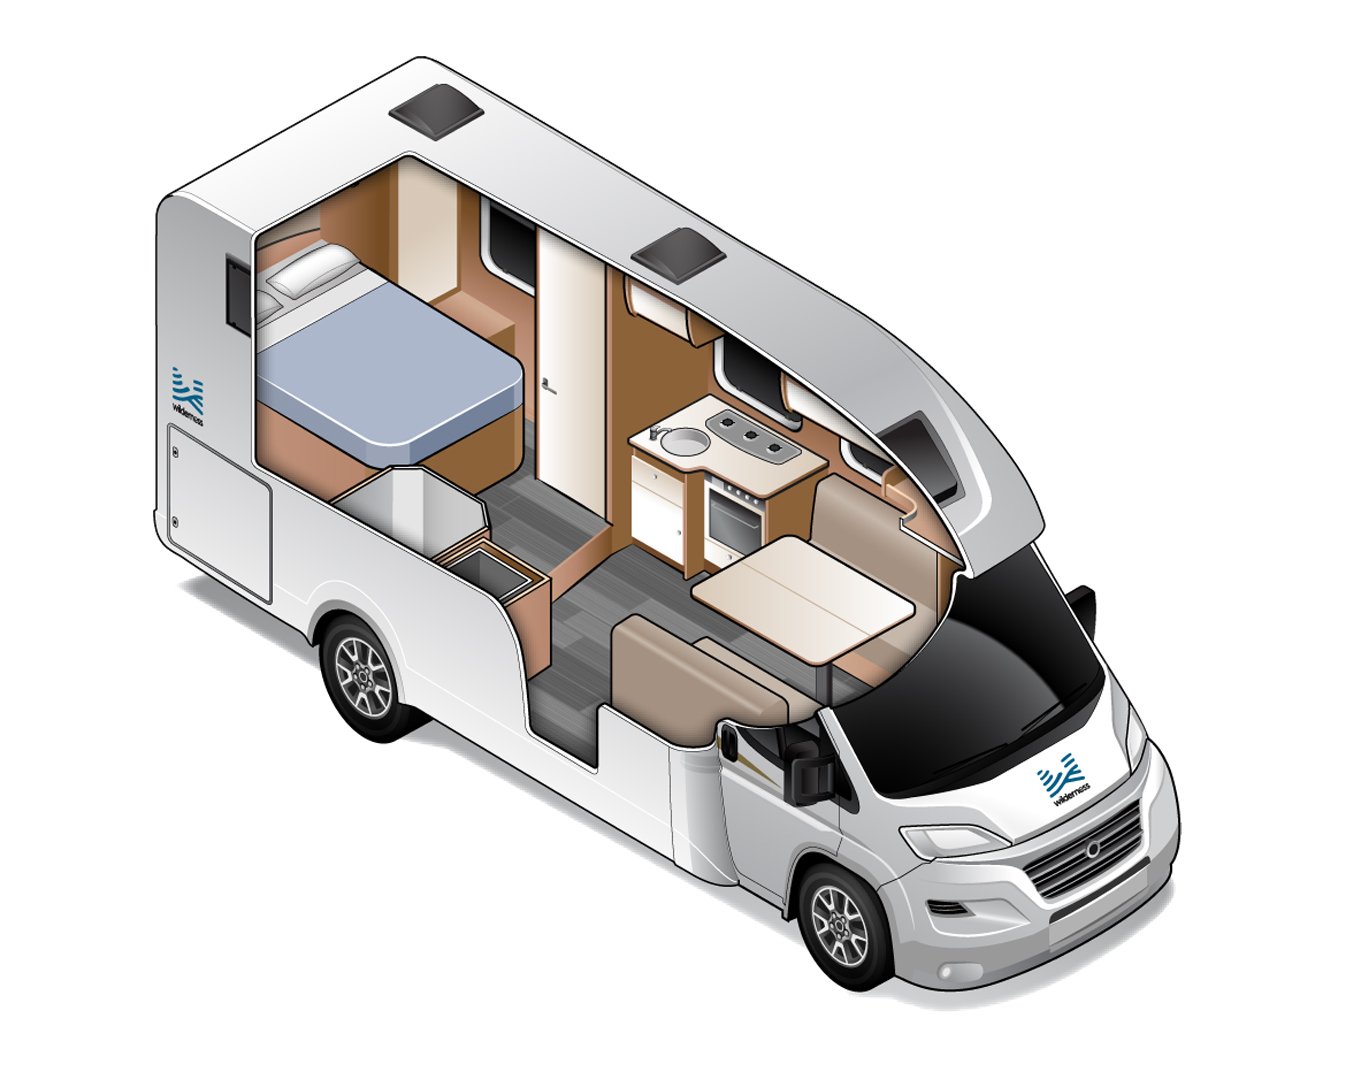 Double for 2 - Two Berth Motorhome | Wilderness Motorhomes - Interior #2